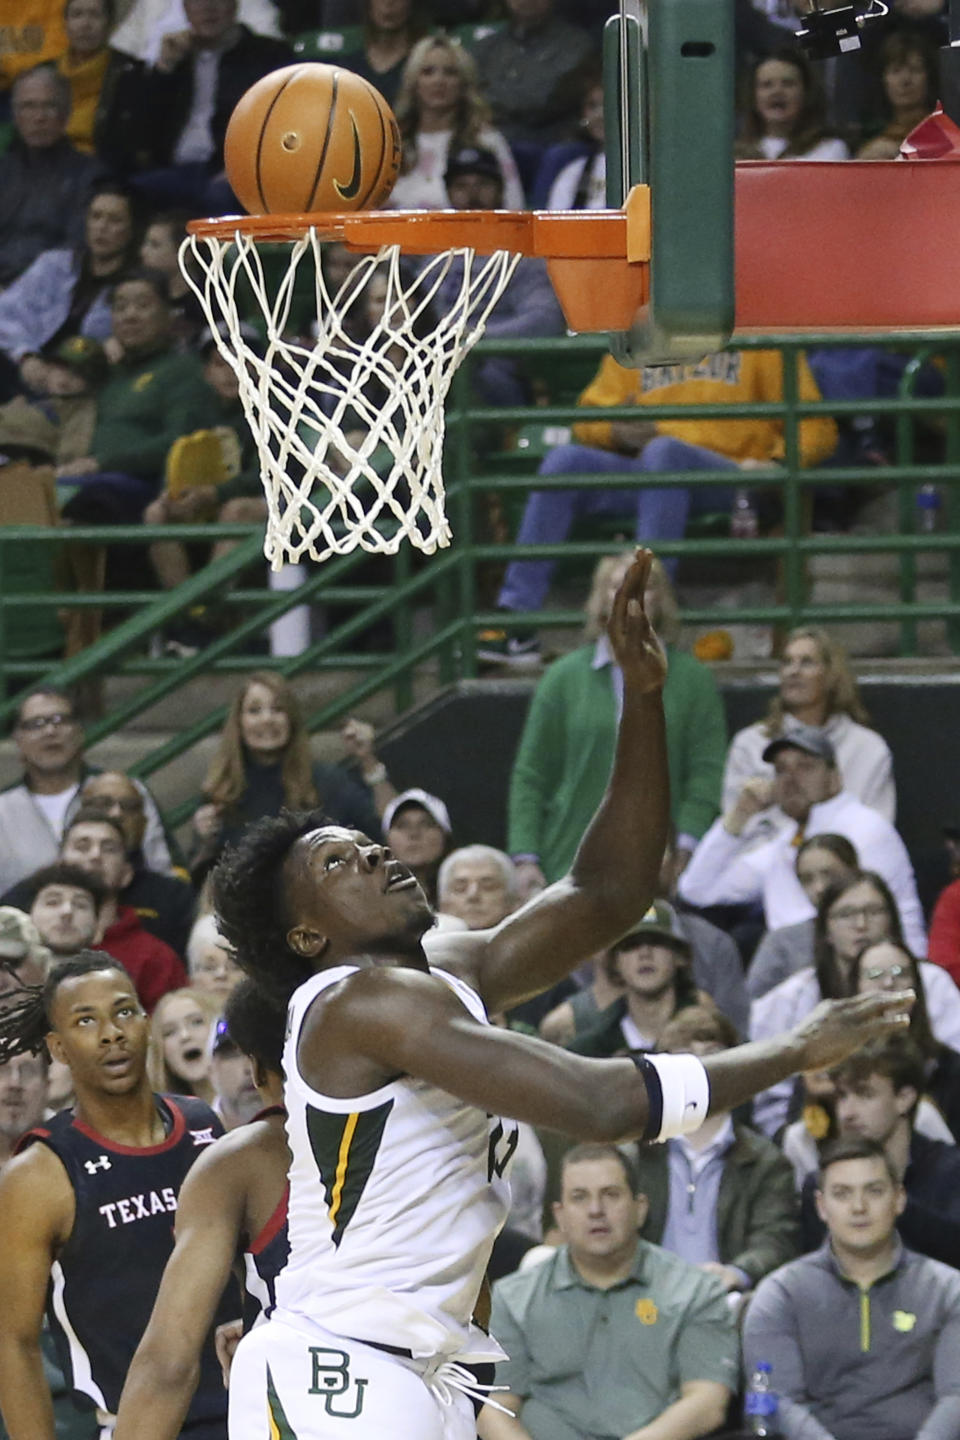 FILE - Baylor forward Jonathan Tchamwa Tchatchoua scores against Texas Tech in the second half of an NCAA college basketball game, Saturday, Feb. 4, 2023, in Waco, Texas. Tchamwa Tchatchoua sees himself as a “walking miracle” after getting back on the court for 14th-ranked Baylor nearly a full year after a gruesome knee injury that many people thought would end his career. (AP Photo/Rod Aydelotte, File)